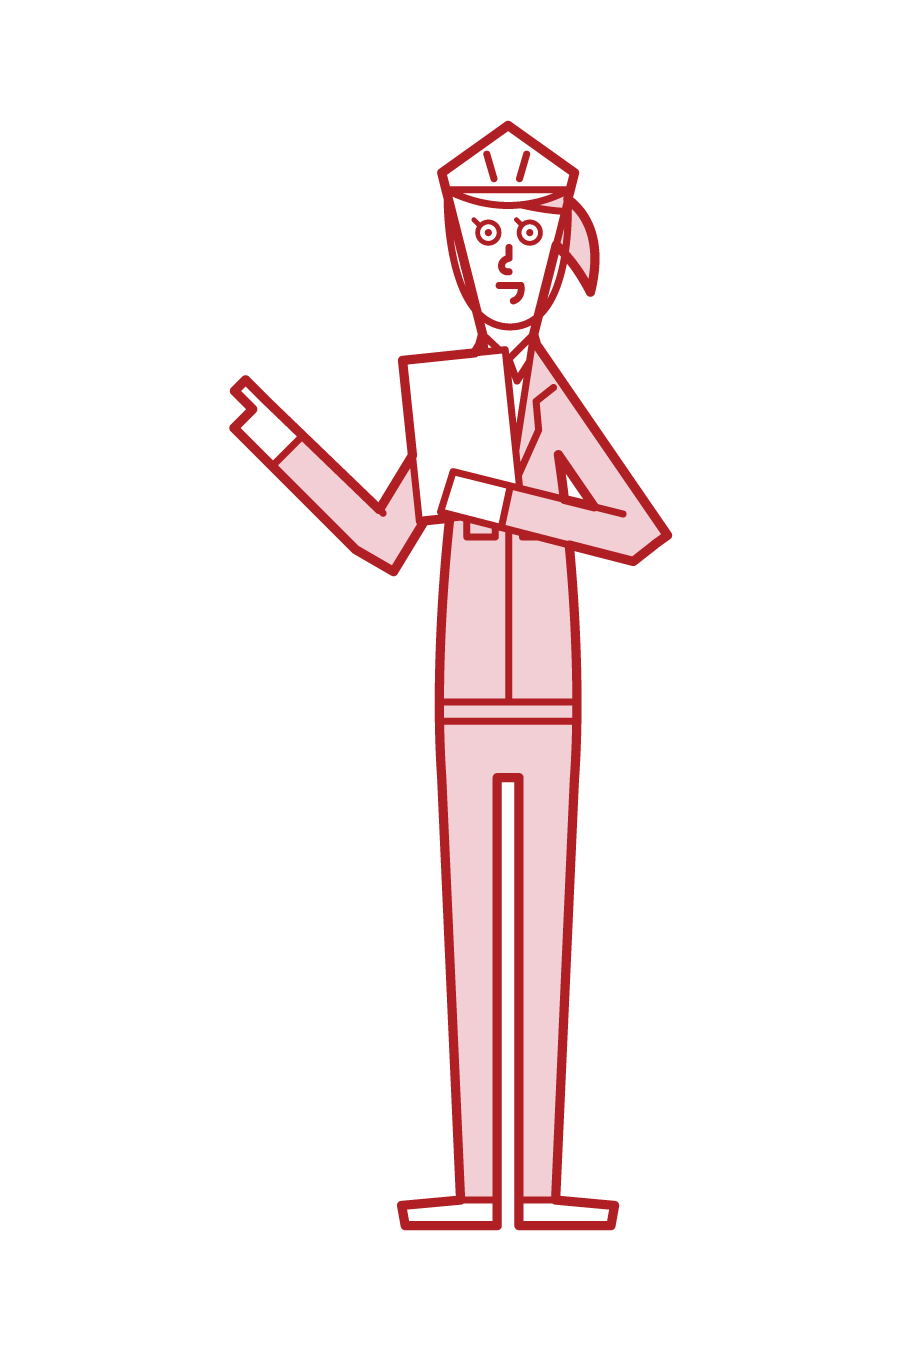 Illustration of a person (woman) who confirms safety and calls